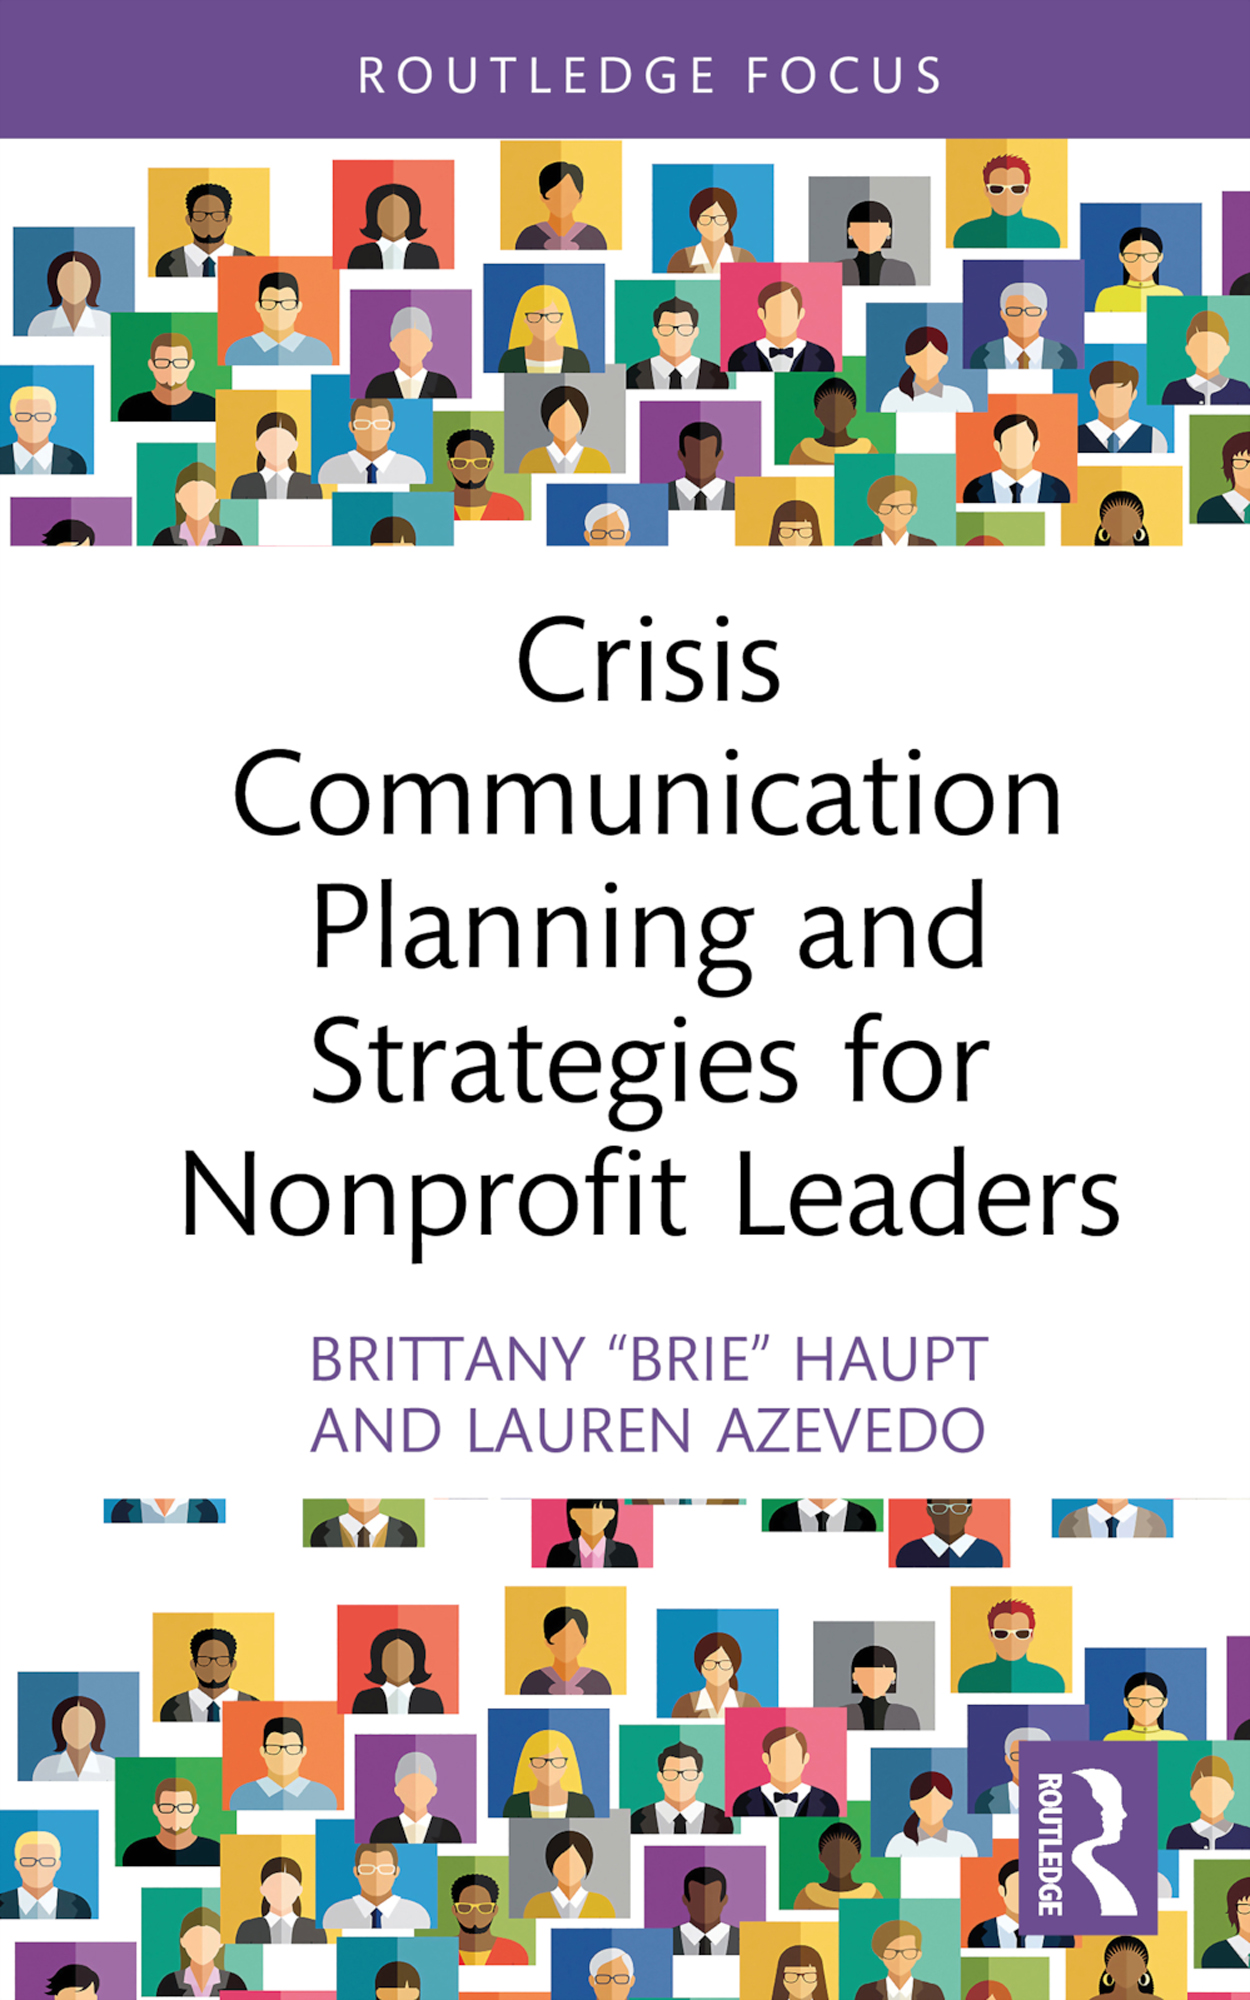 Crisis Communication Planning and Strategies for Nonprofit Leaders